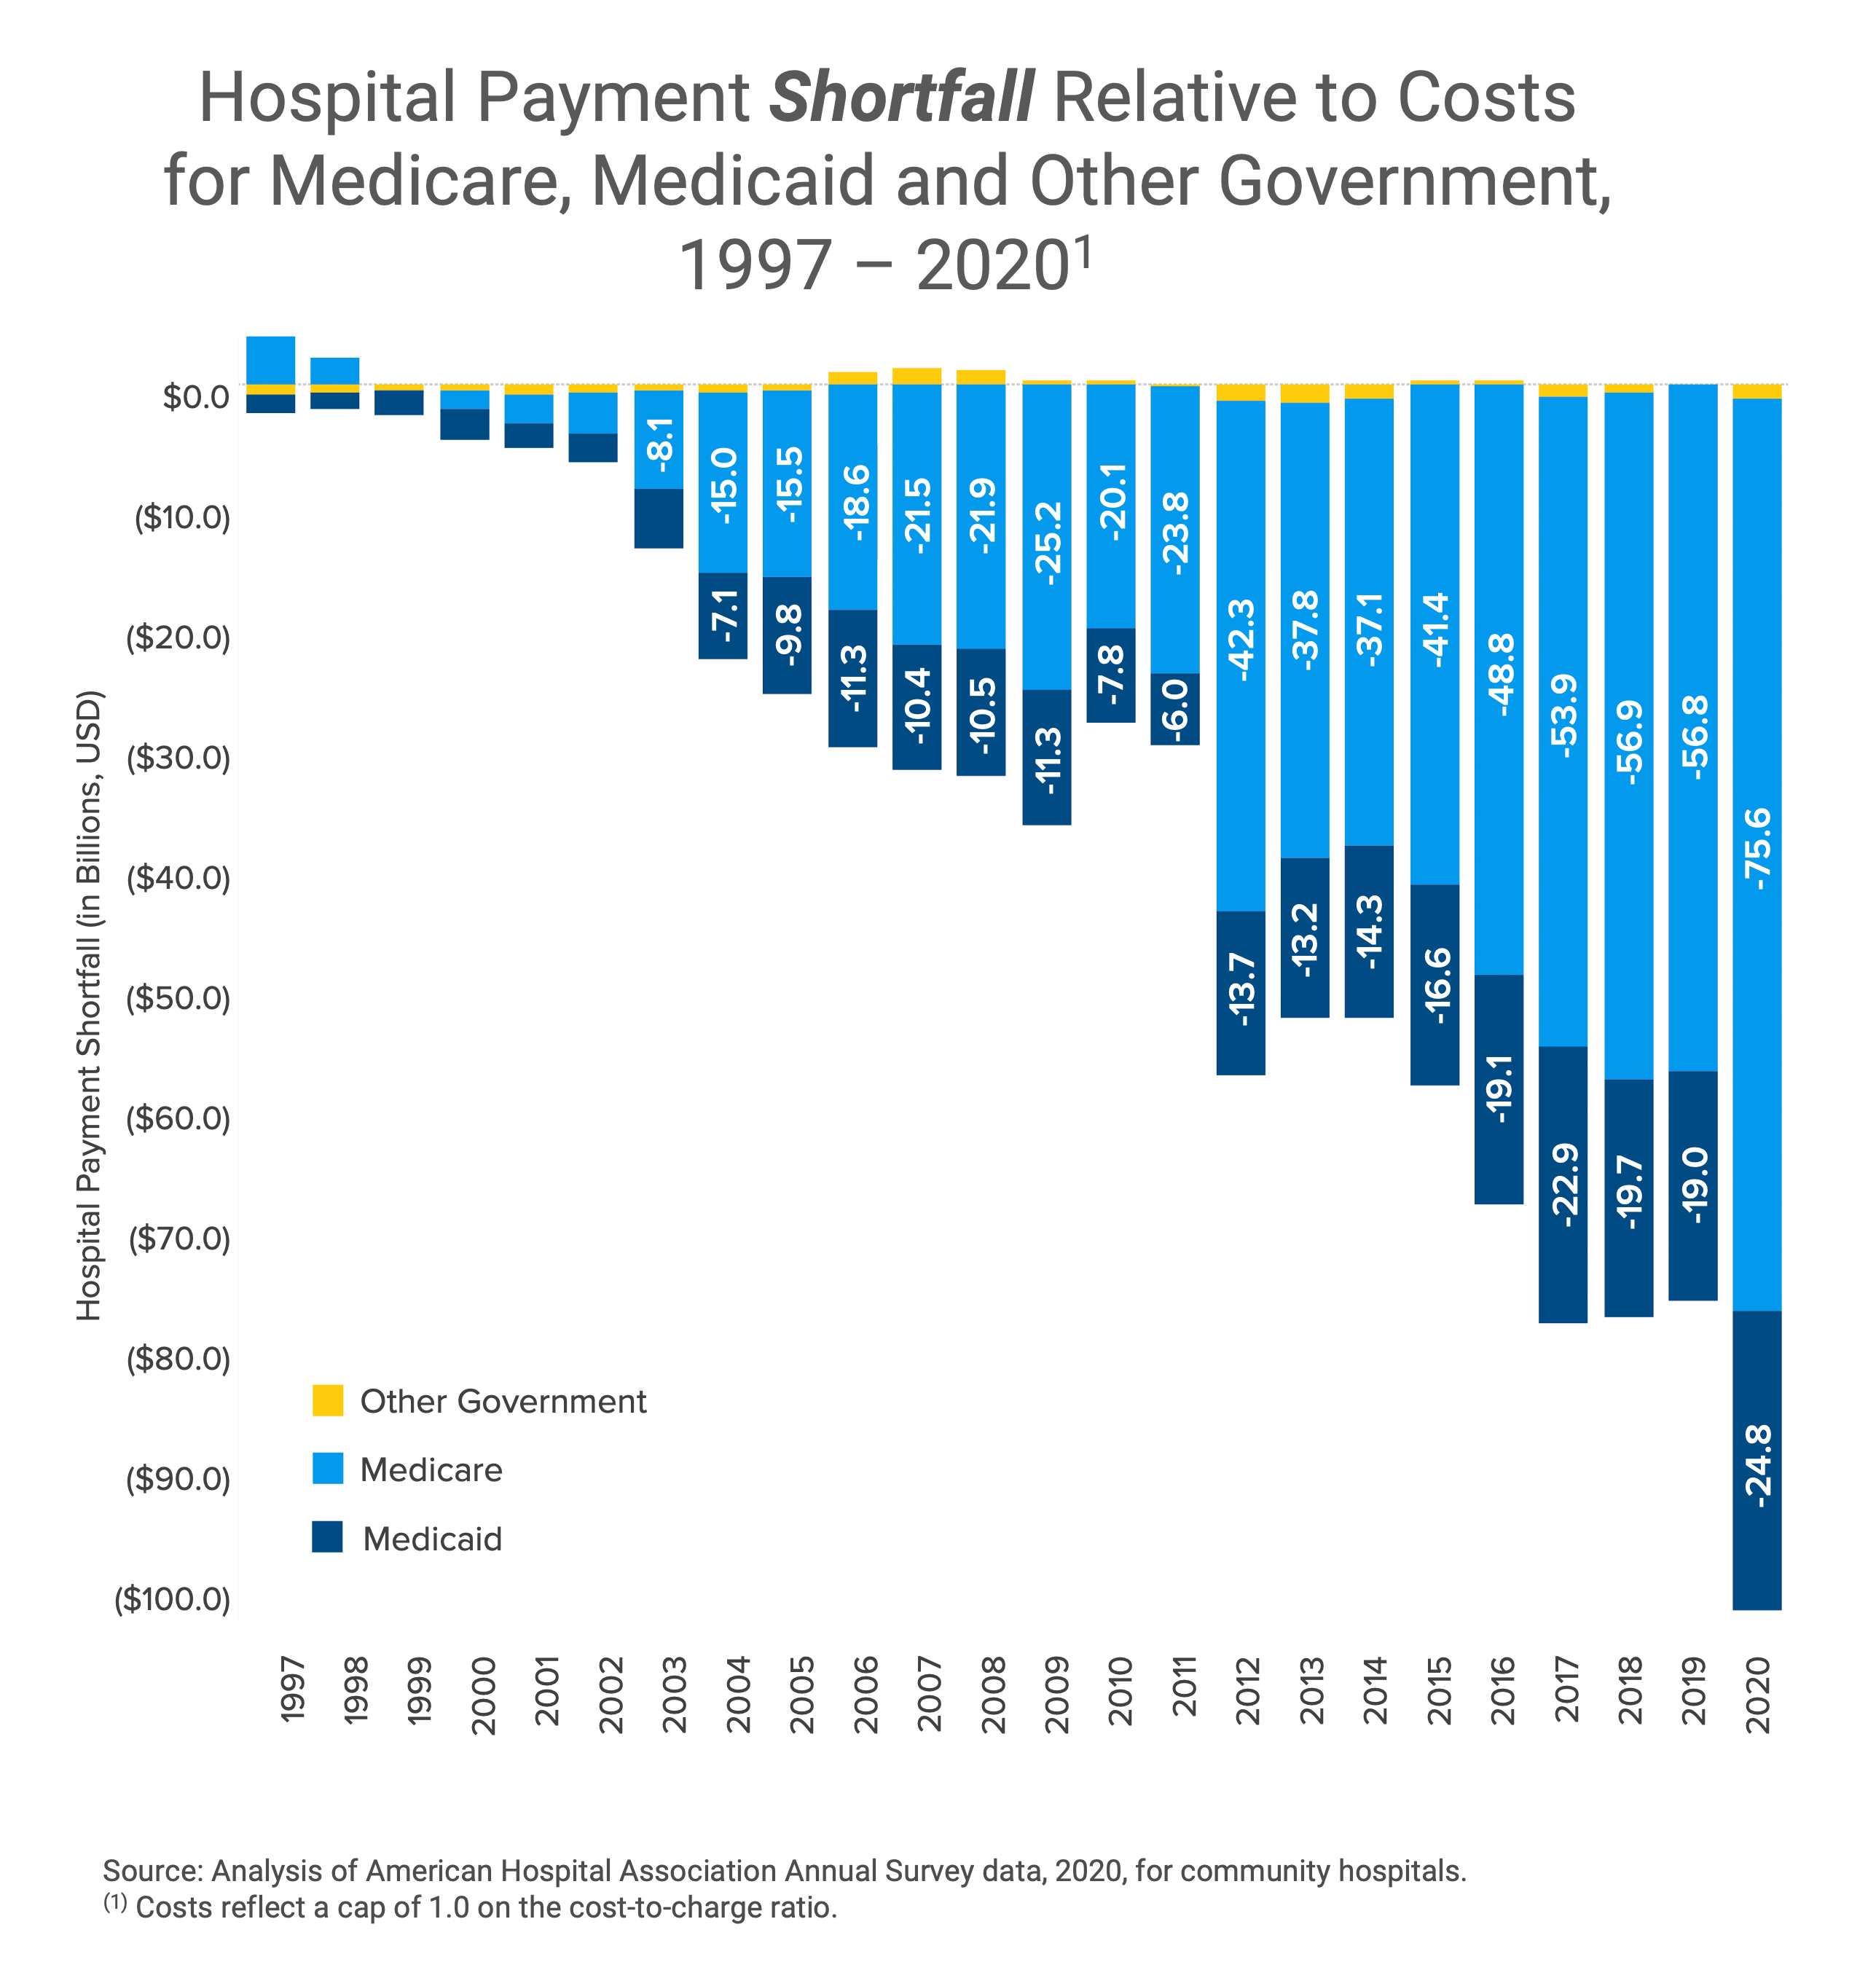 Graph showing hospital payment shortfall over time